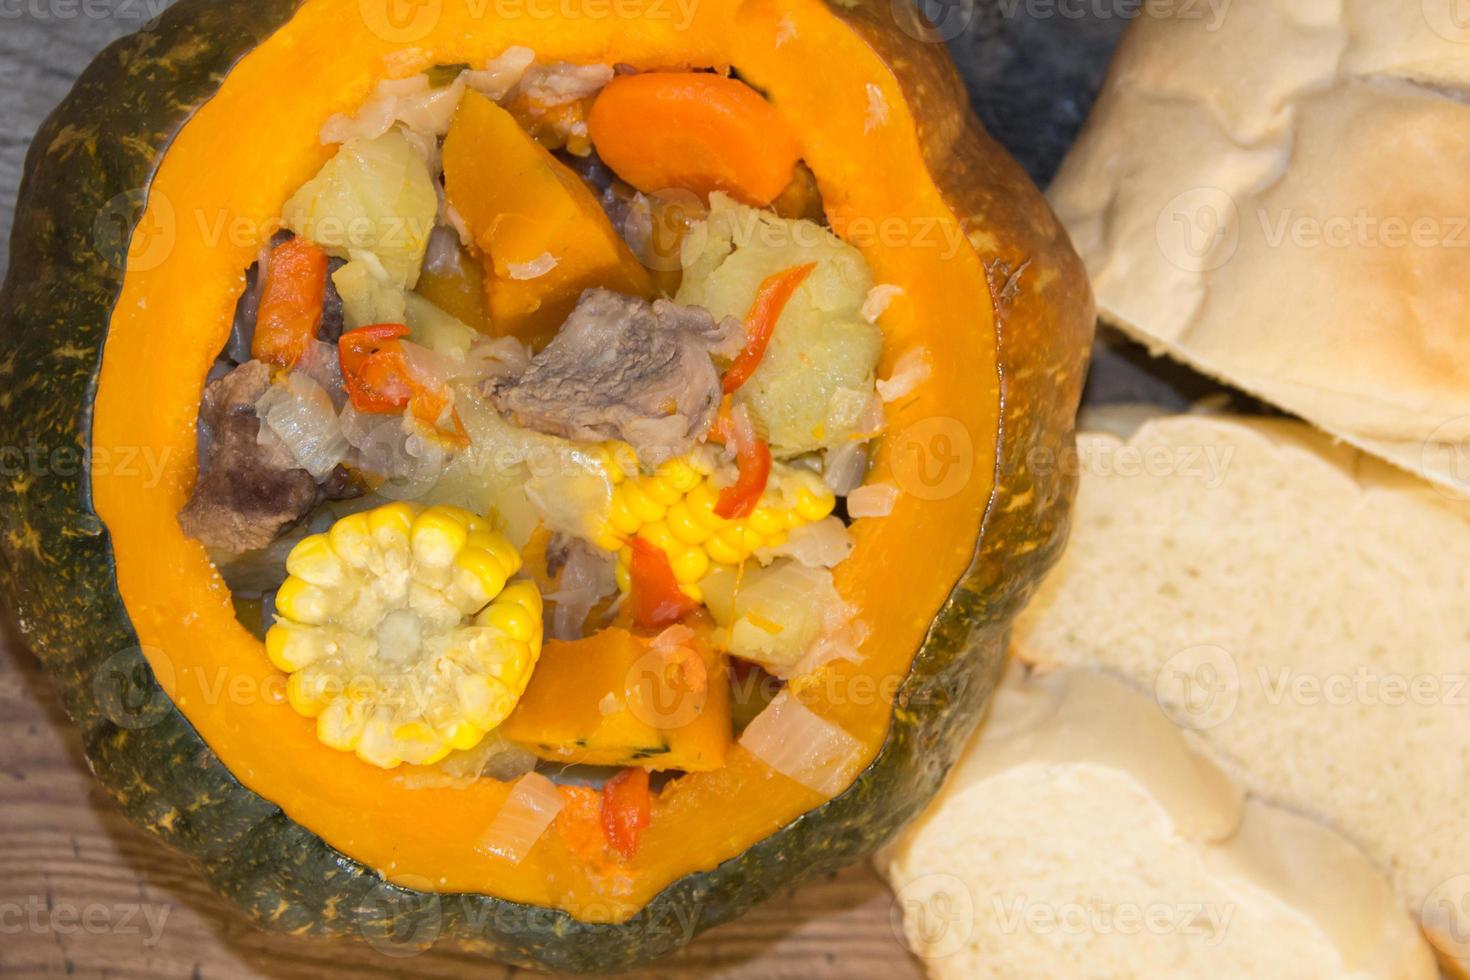 carbonada served in pumpkin typical food of the Argentine gastronomy, Chile, Bolivia and Peru. photo